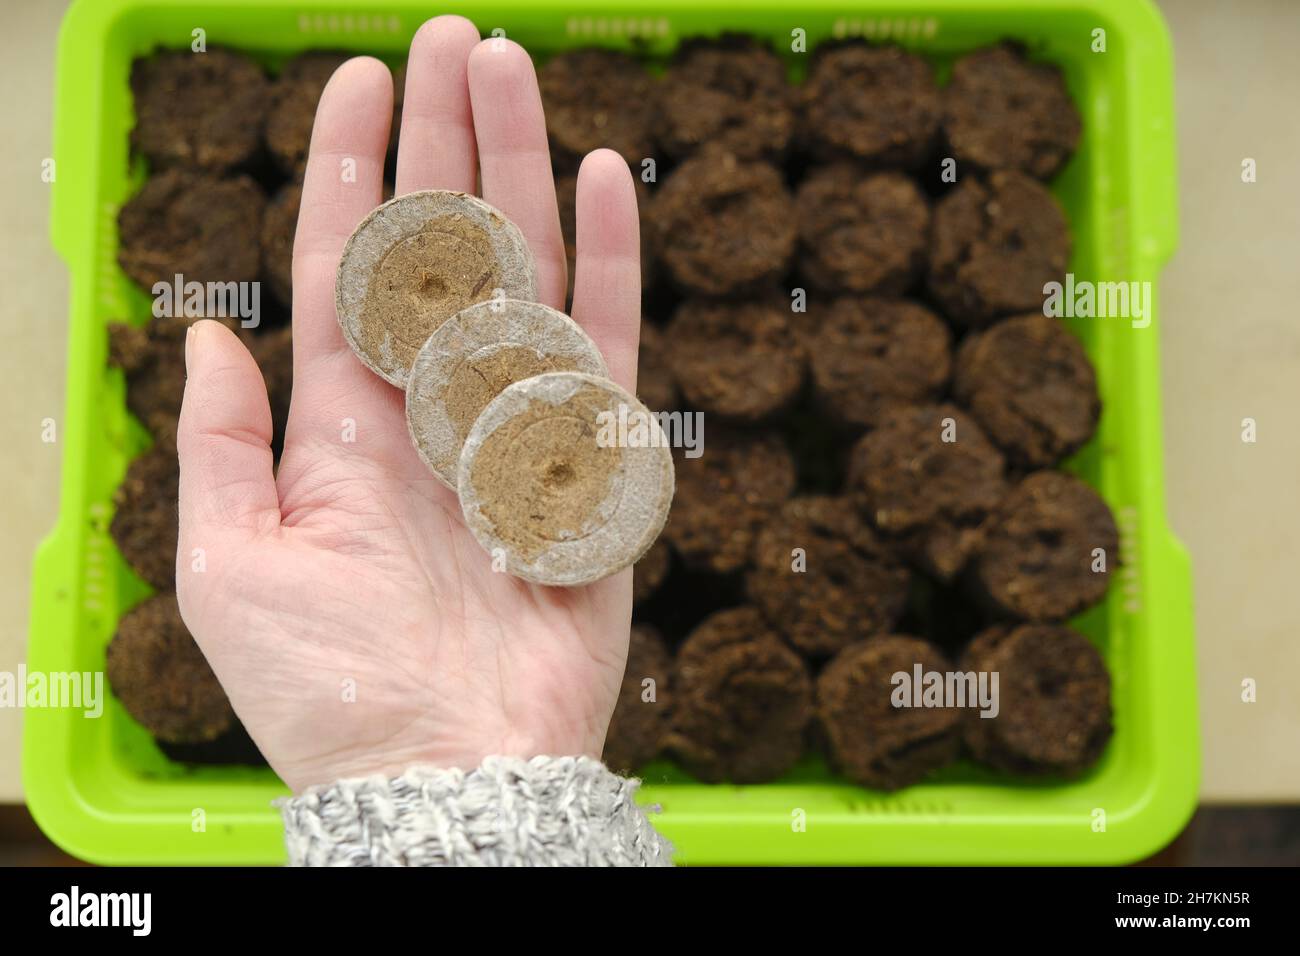 Peat tablets for seedlings. Planting organic material.Sowing seeds. Peat tablets in a hand on a seedling green tray background.plant seeds in peat Stock Photo